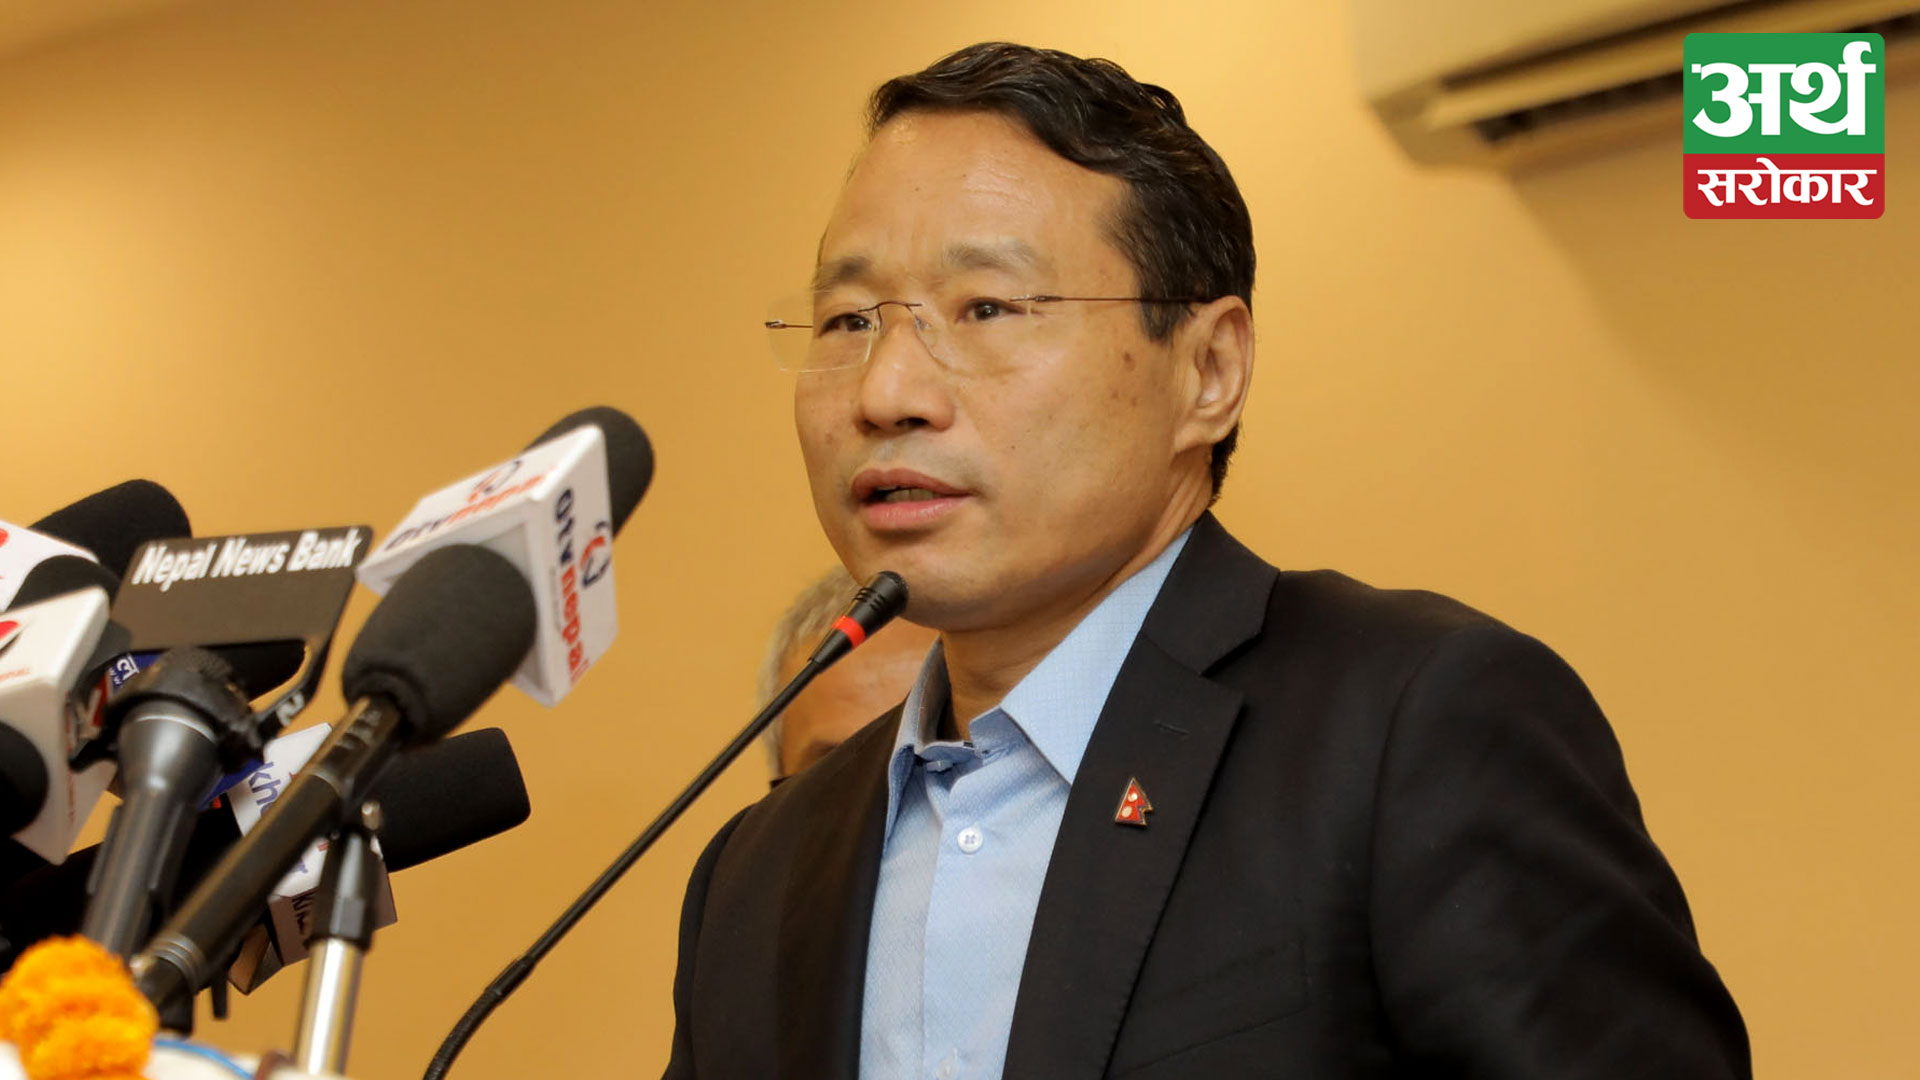 ‘Economy is sluggish but not in crisis’- Finance Minister Pun